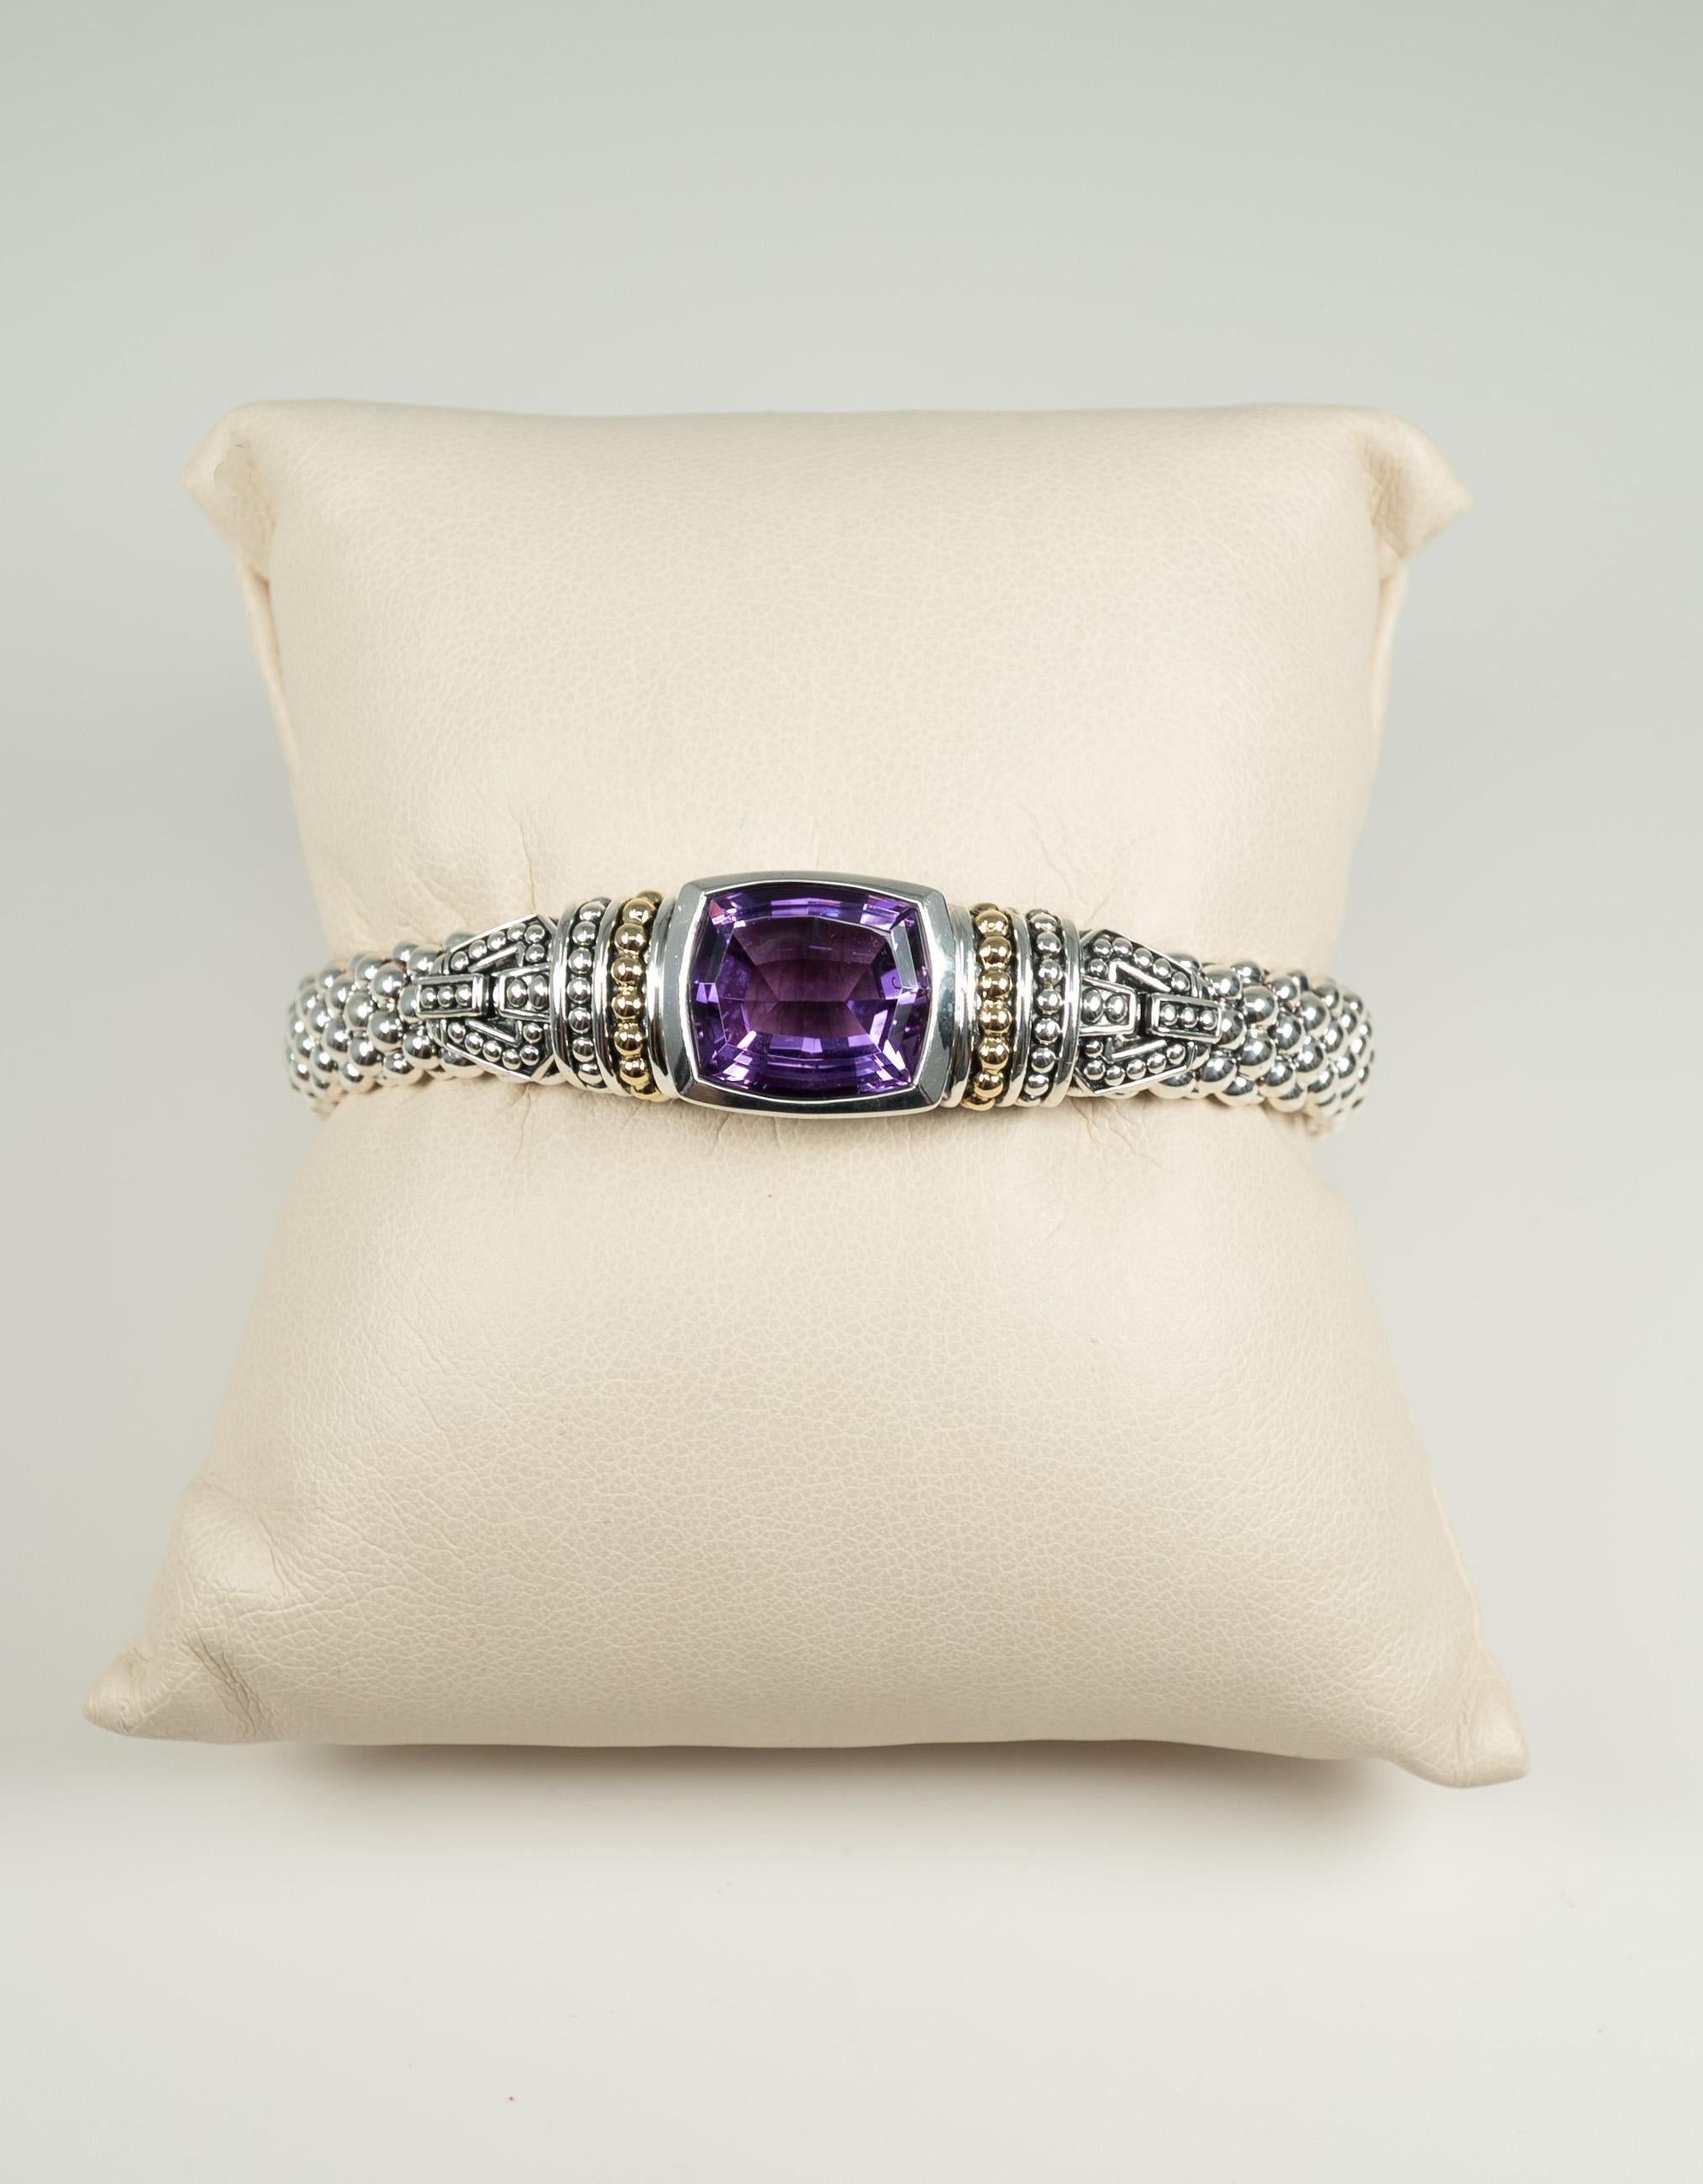 From the Caviar line by Lagos, this bracelet features sterling silver beads and is centered with one amethyst stone.